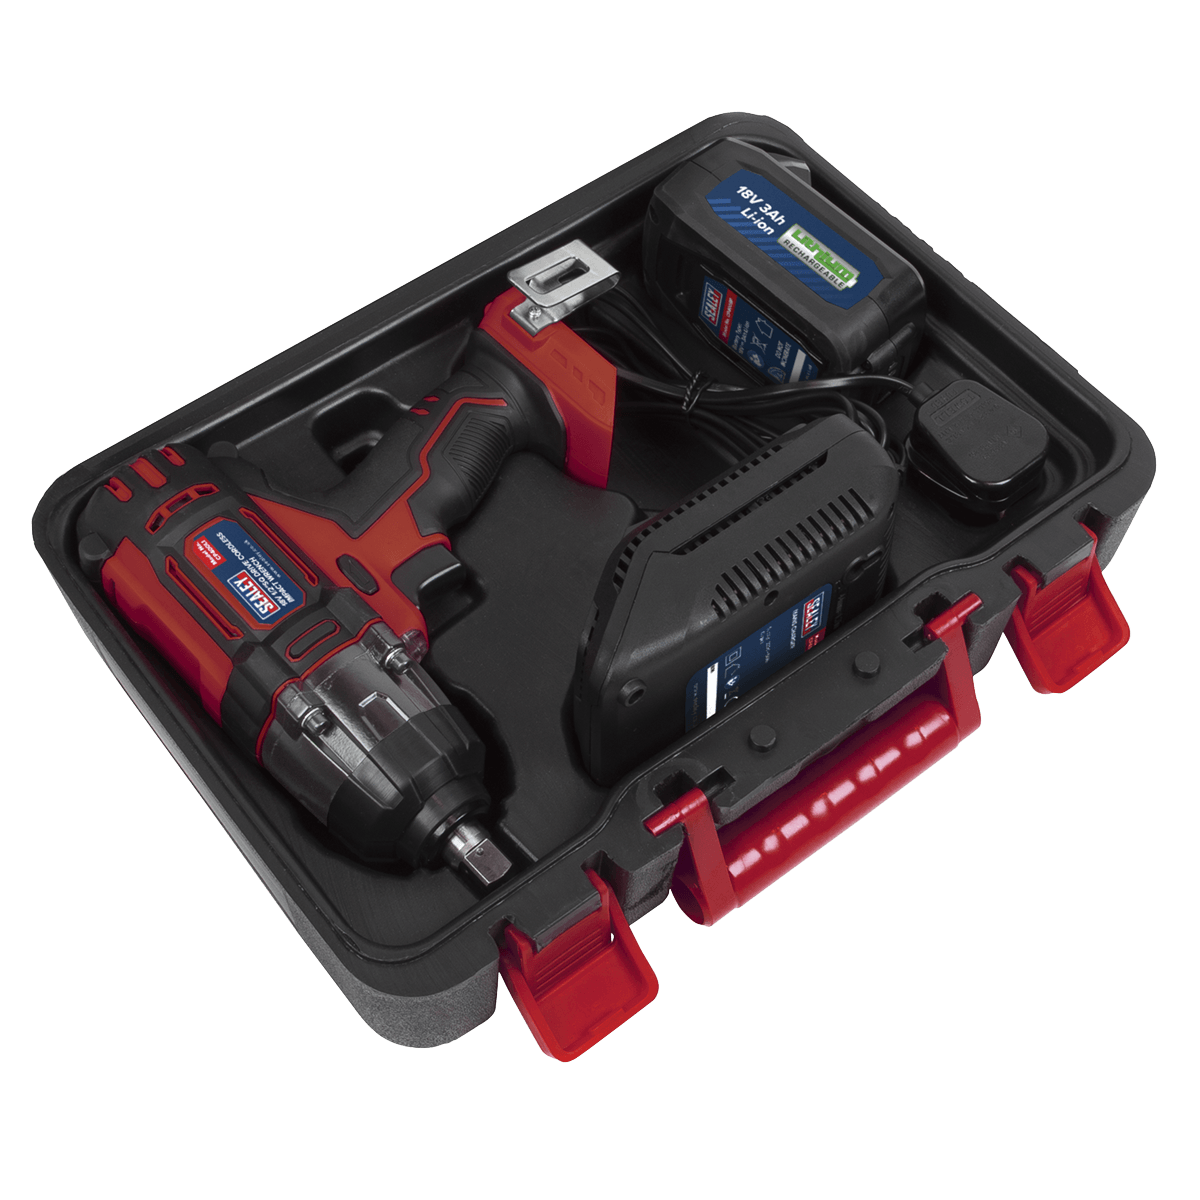 Sealey Cordless Impact Wrench 18V 3Ah Lithium-ion 1/2"Sq Drive With Battery and Charger CP400LI - Red Or Green - Tools 2U Direct SW